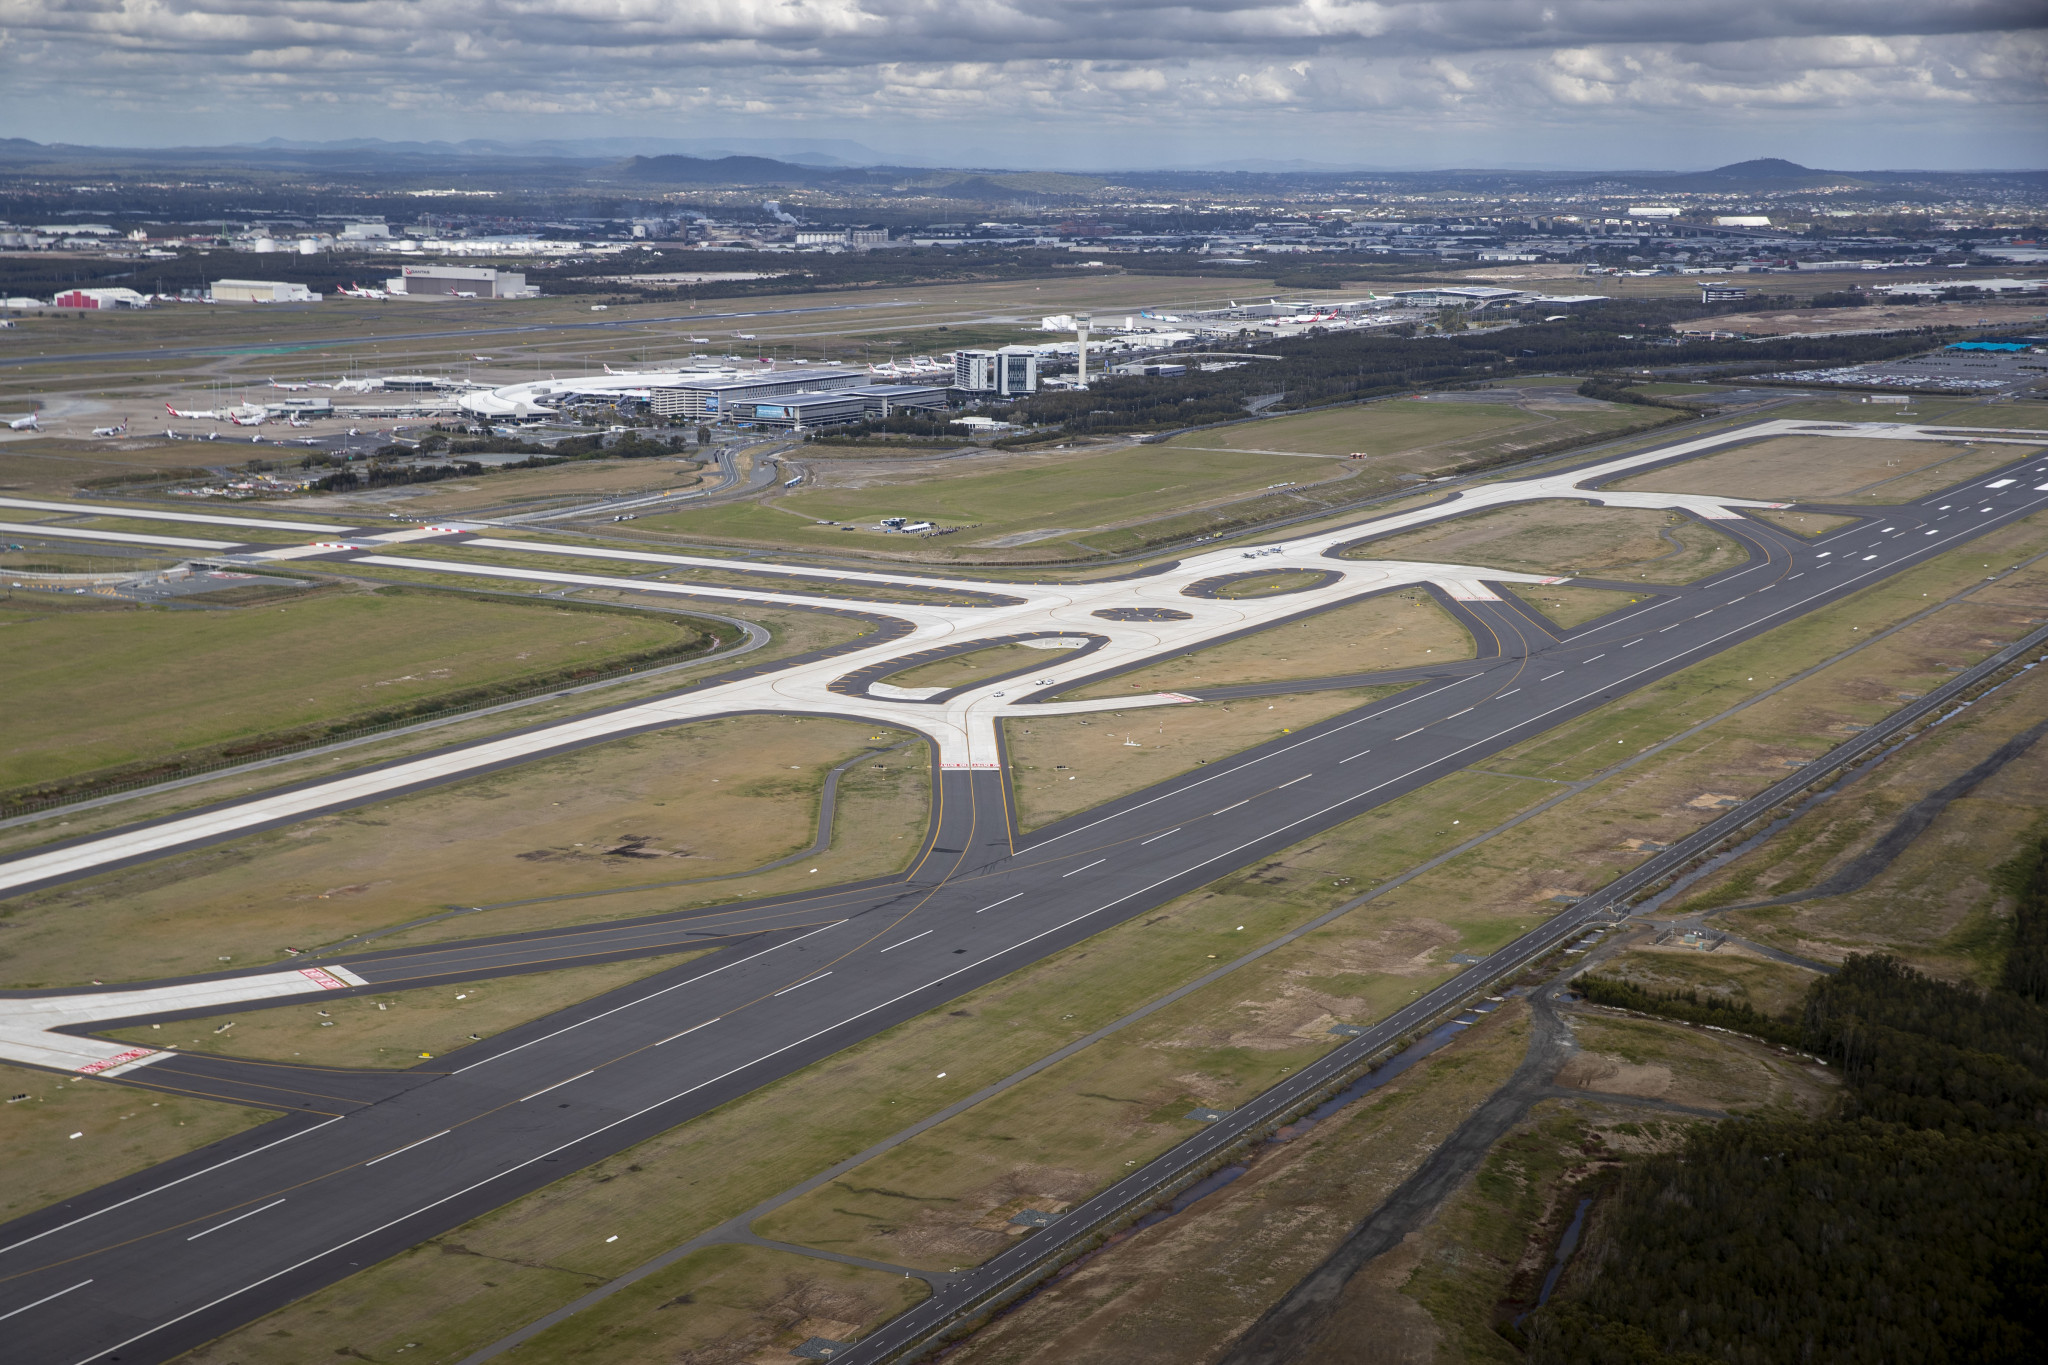 Protesters say the new runway at Brisbane Airport which opened in 2020 has had a harmful effect on local residents ©Getty Images